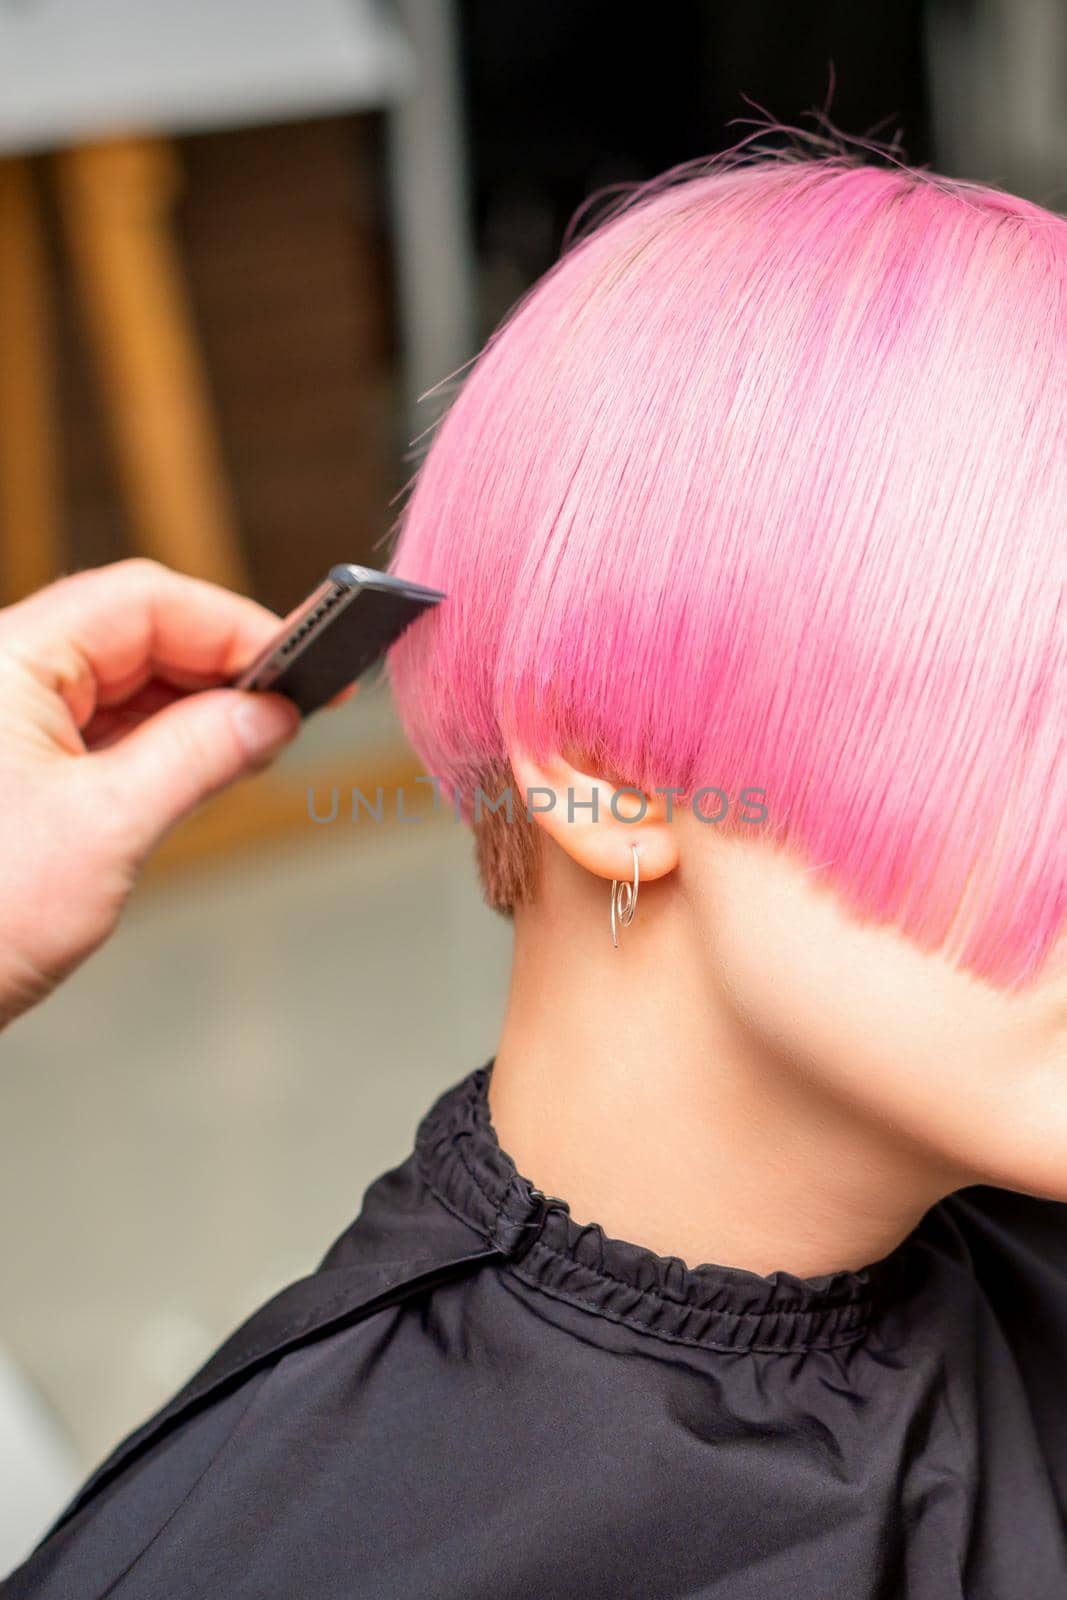 A hairdresser is combing the dyed pink short hair of the female client in a hairdresser salon